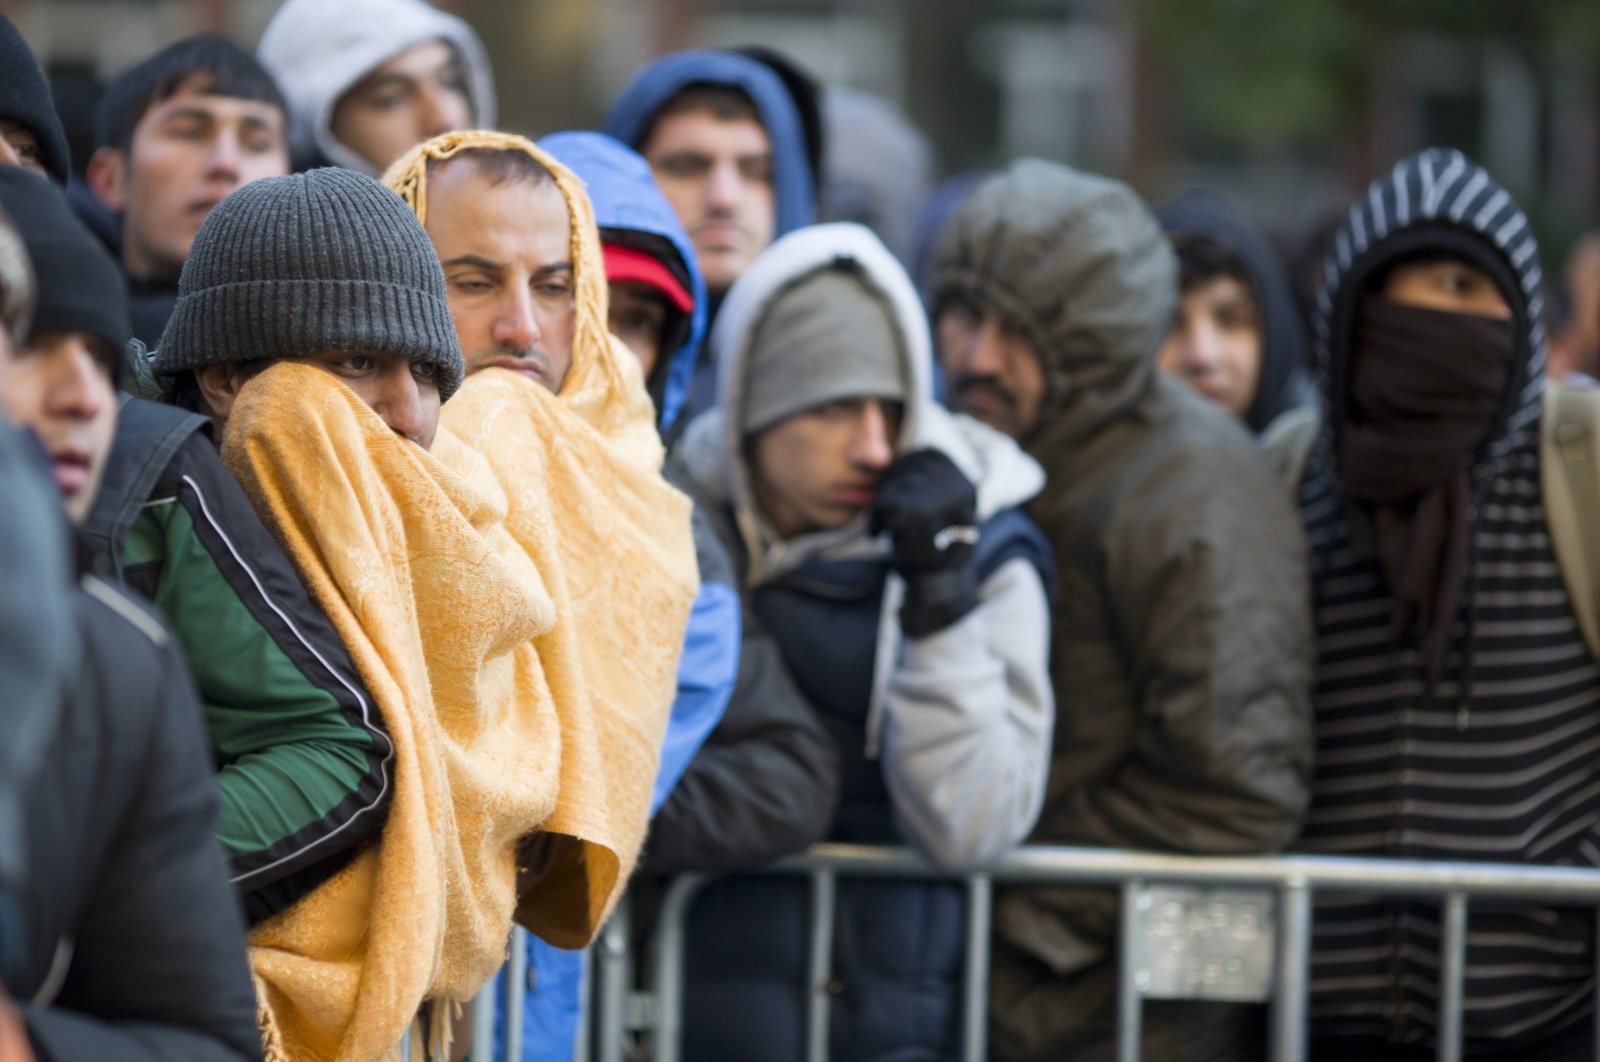 Refugees and migrants try to keep warm as temperatures hover around freezing as they wait for registration and allocation of a sleeping place on the premises of the State Office of Health and Welfare (LaGeSo) in Berlin, Germany, Oct. 12, 2015. (EPA Photo)